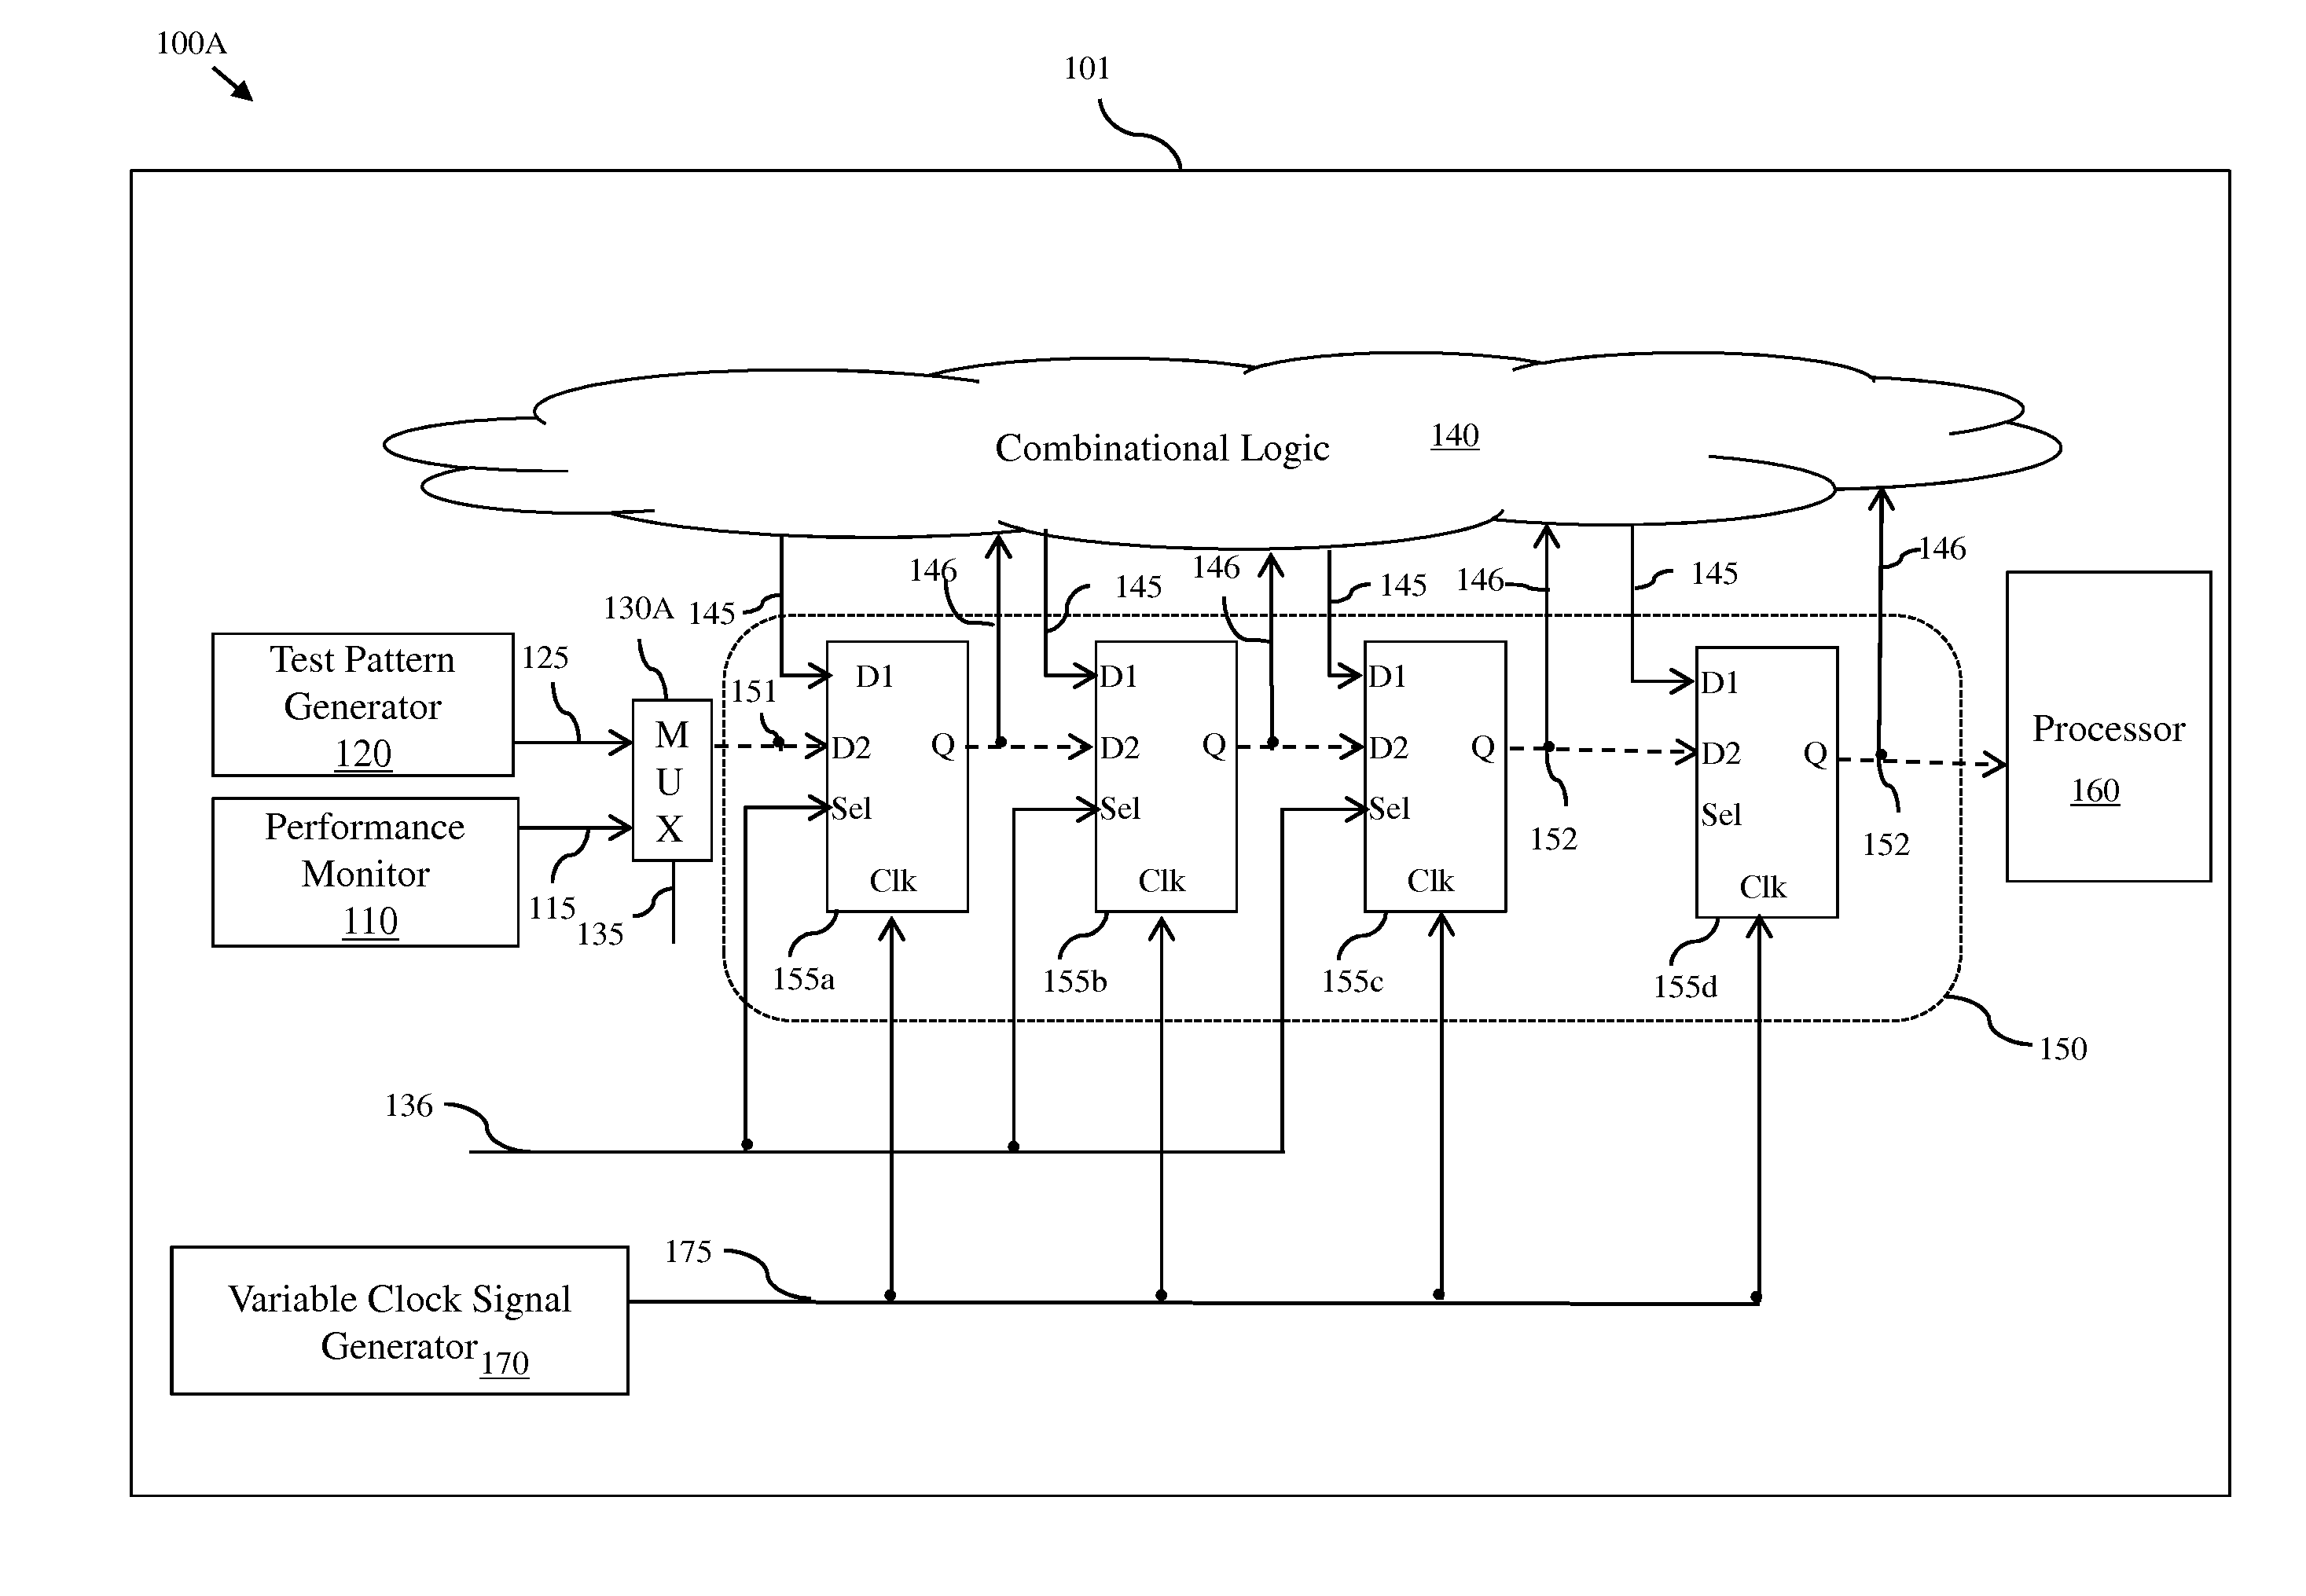 Chip performance monitoring system and method